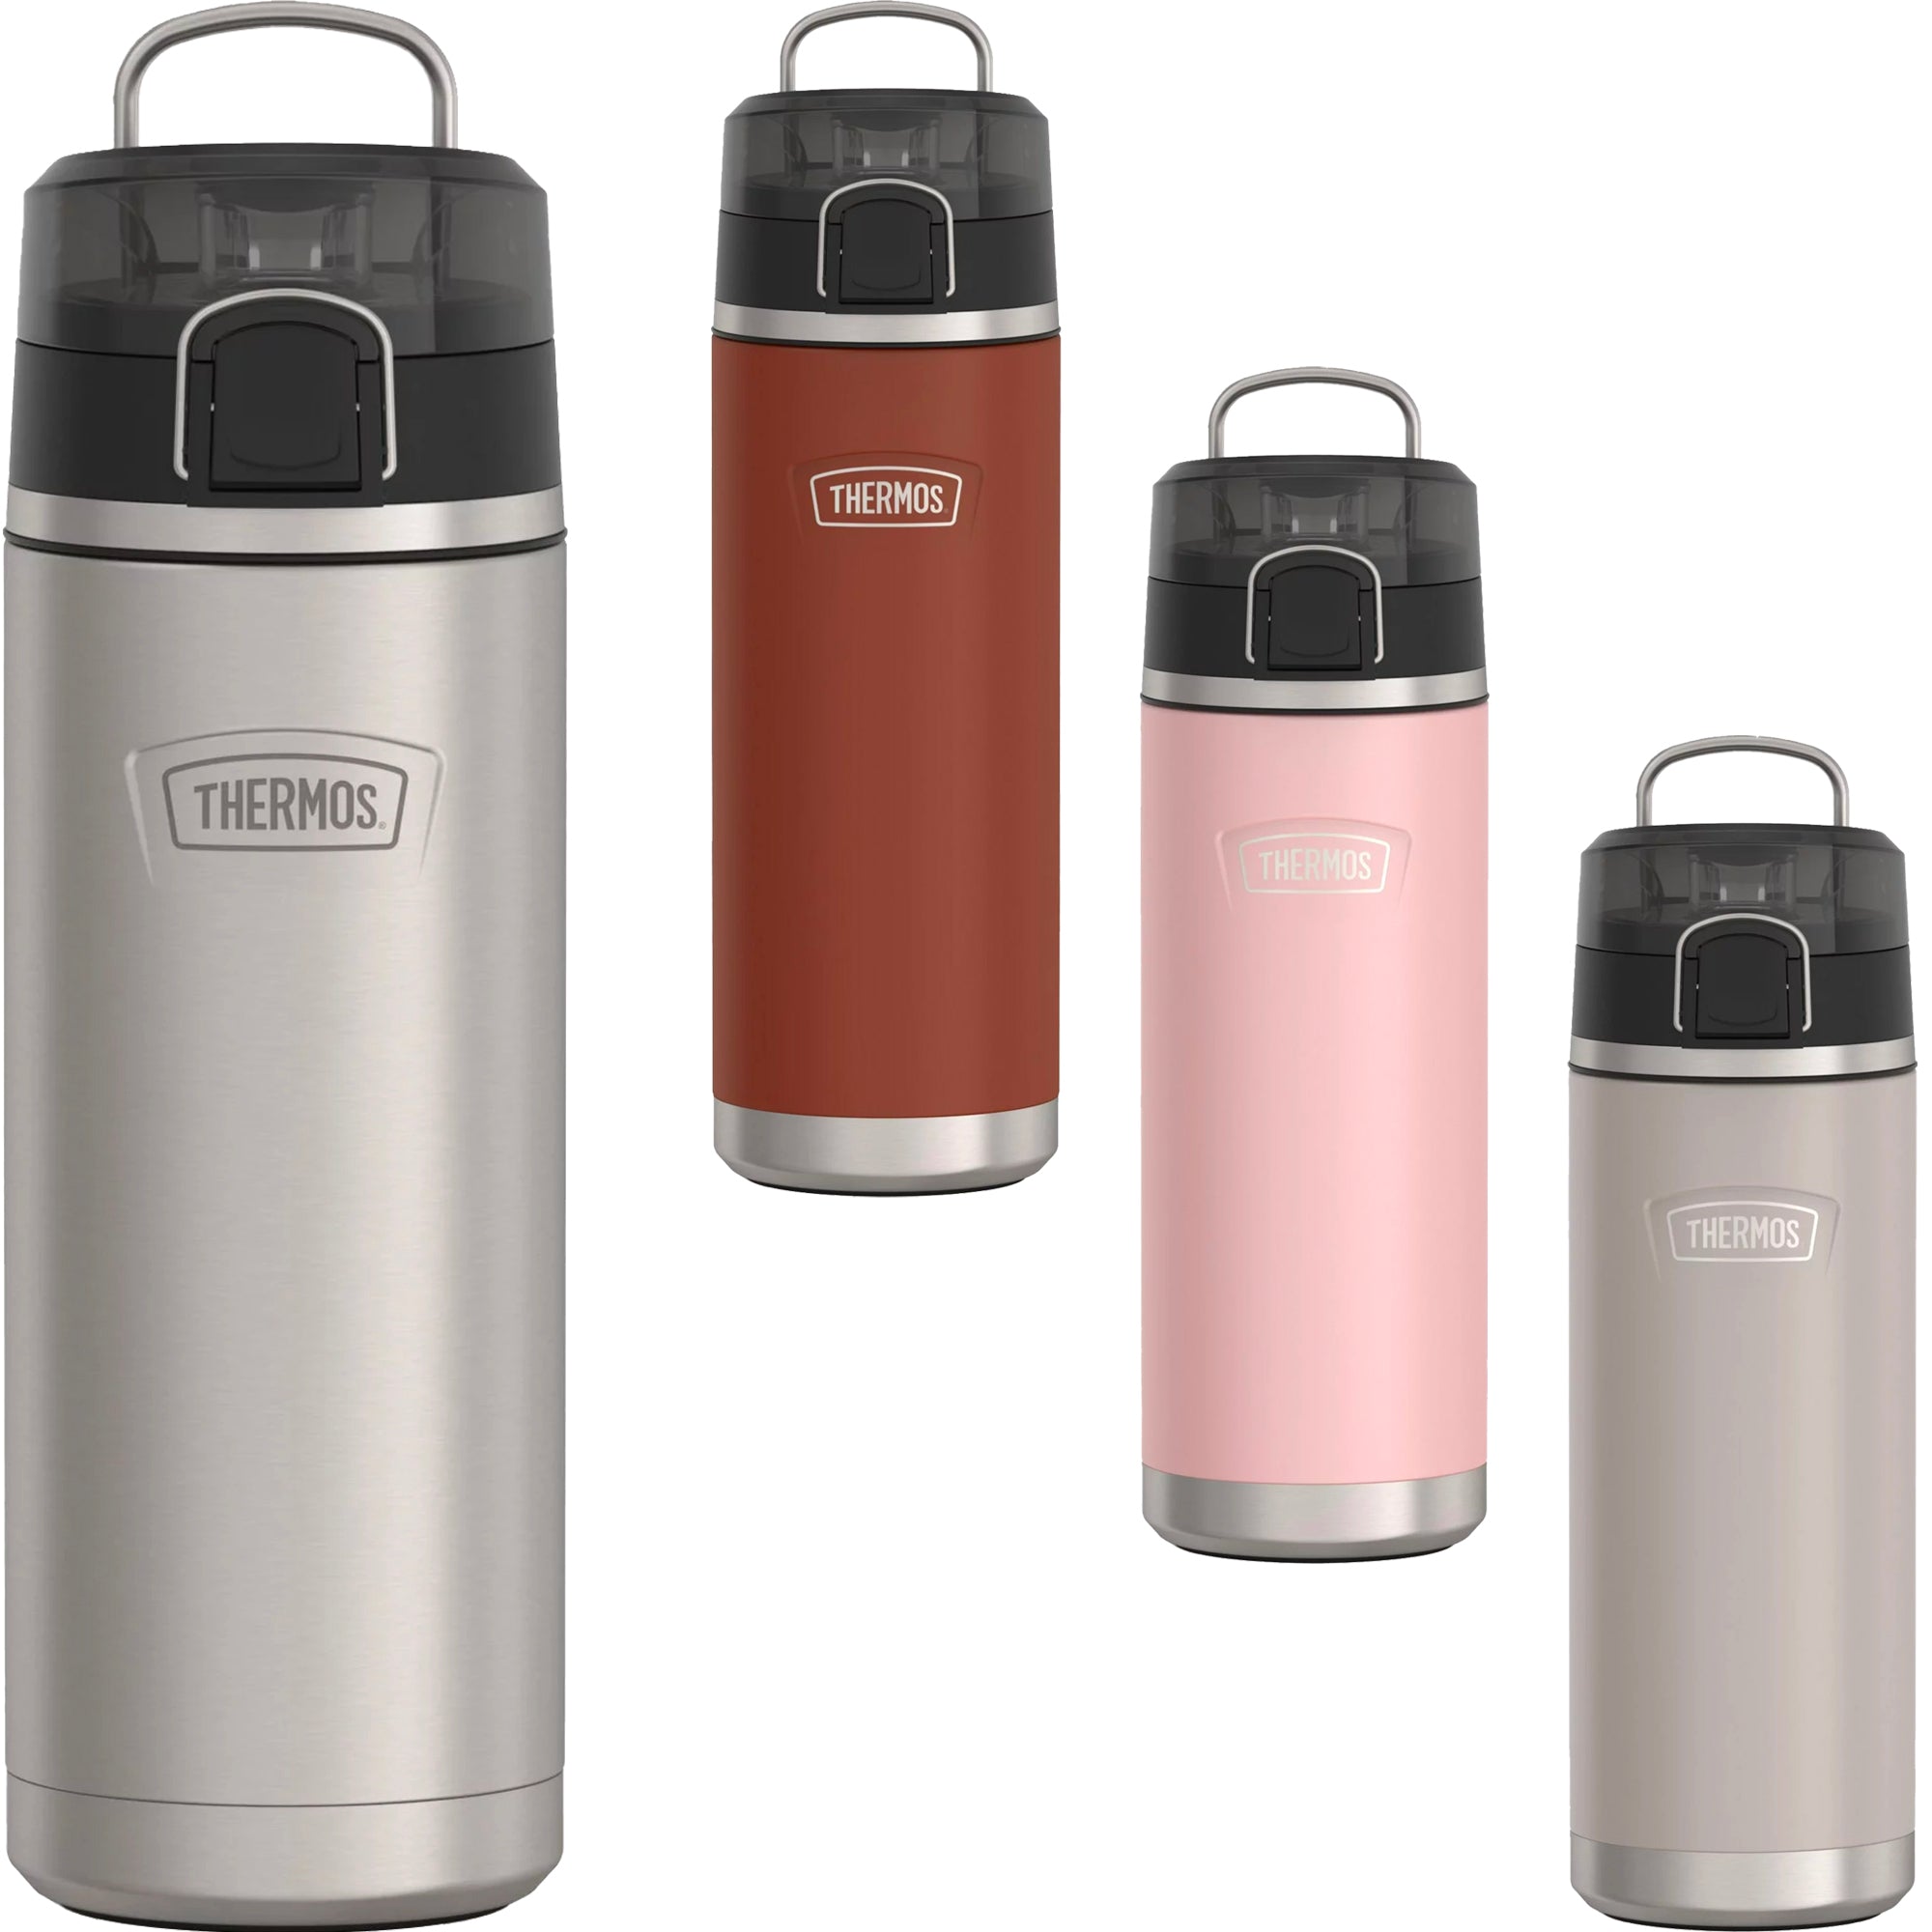 Icon Series by Thermos Stainless Steel Water Bottle with Spout 24 Ounce, Granite